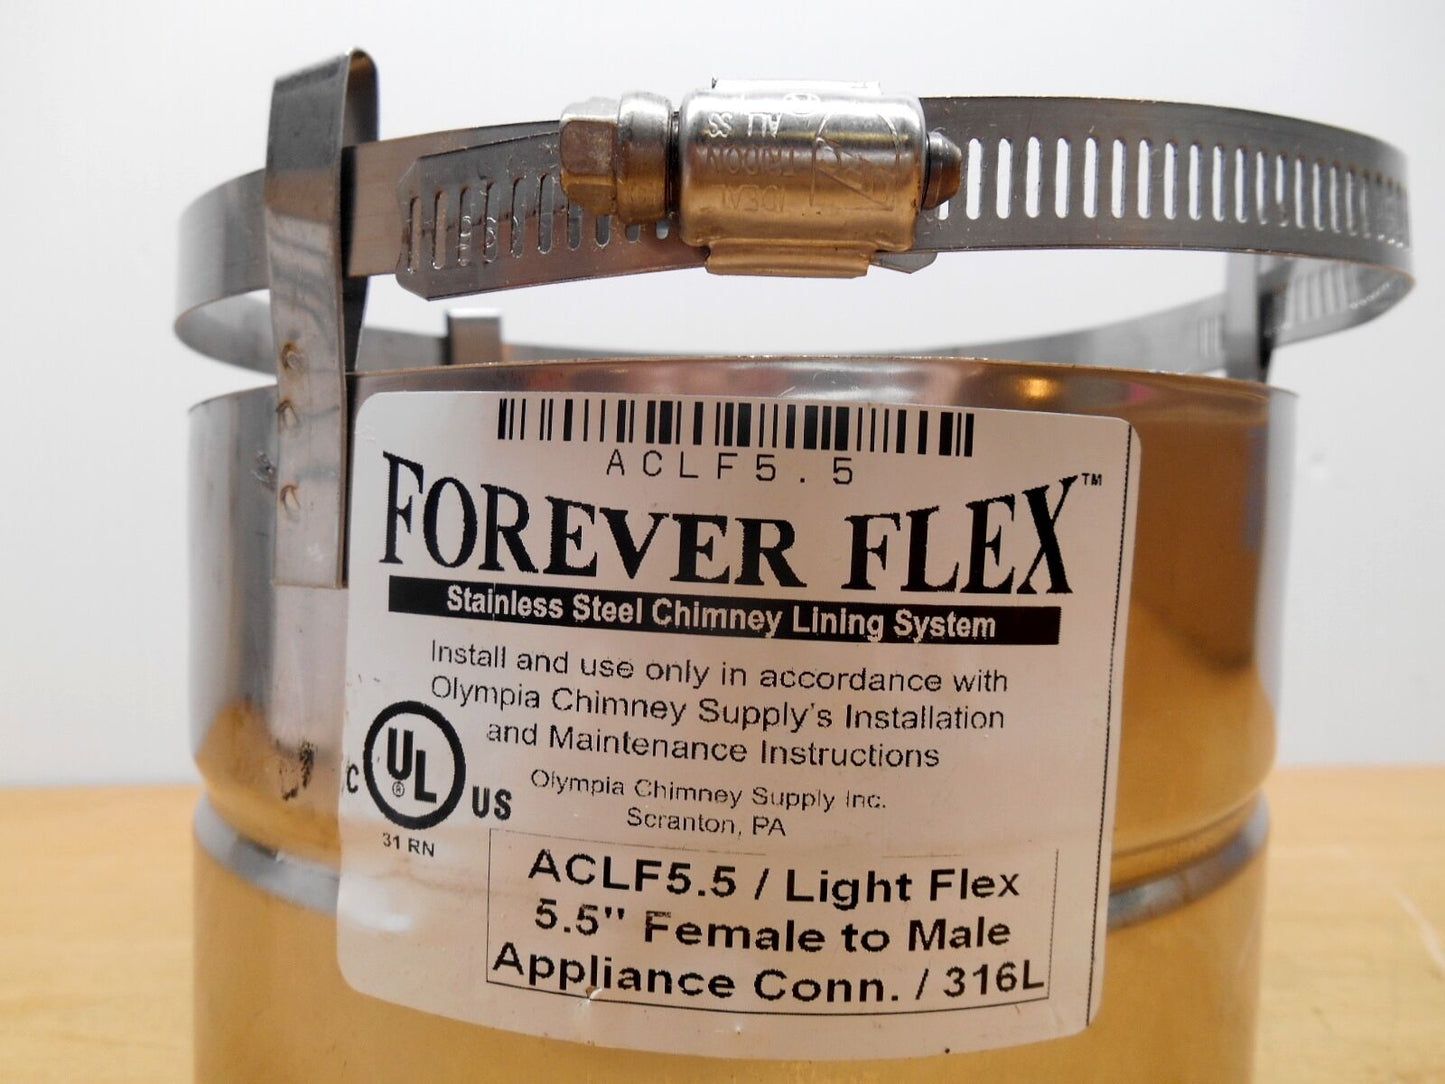 FOREVER FLEX ACLF5.5 LIGHT FLEX 5.5” FEMALE TO MALE CONNECTOR 316L